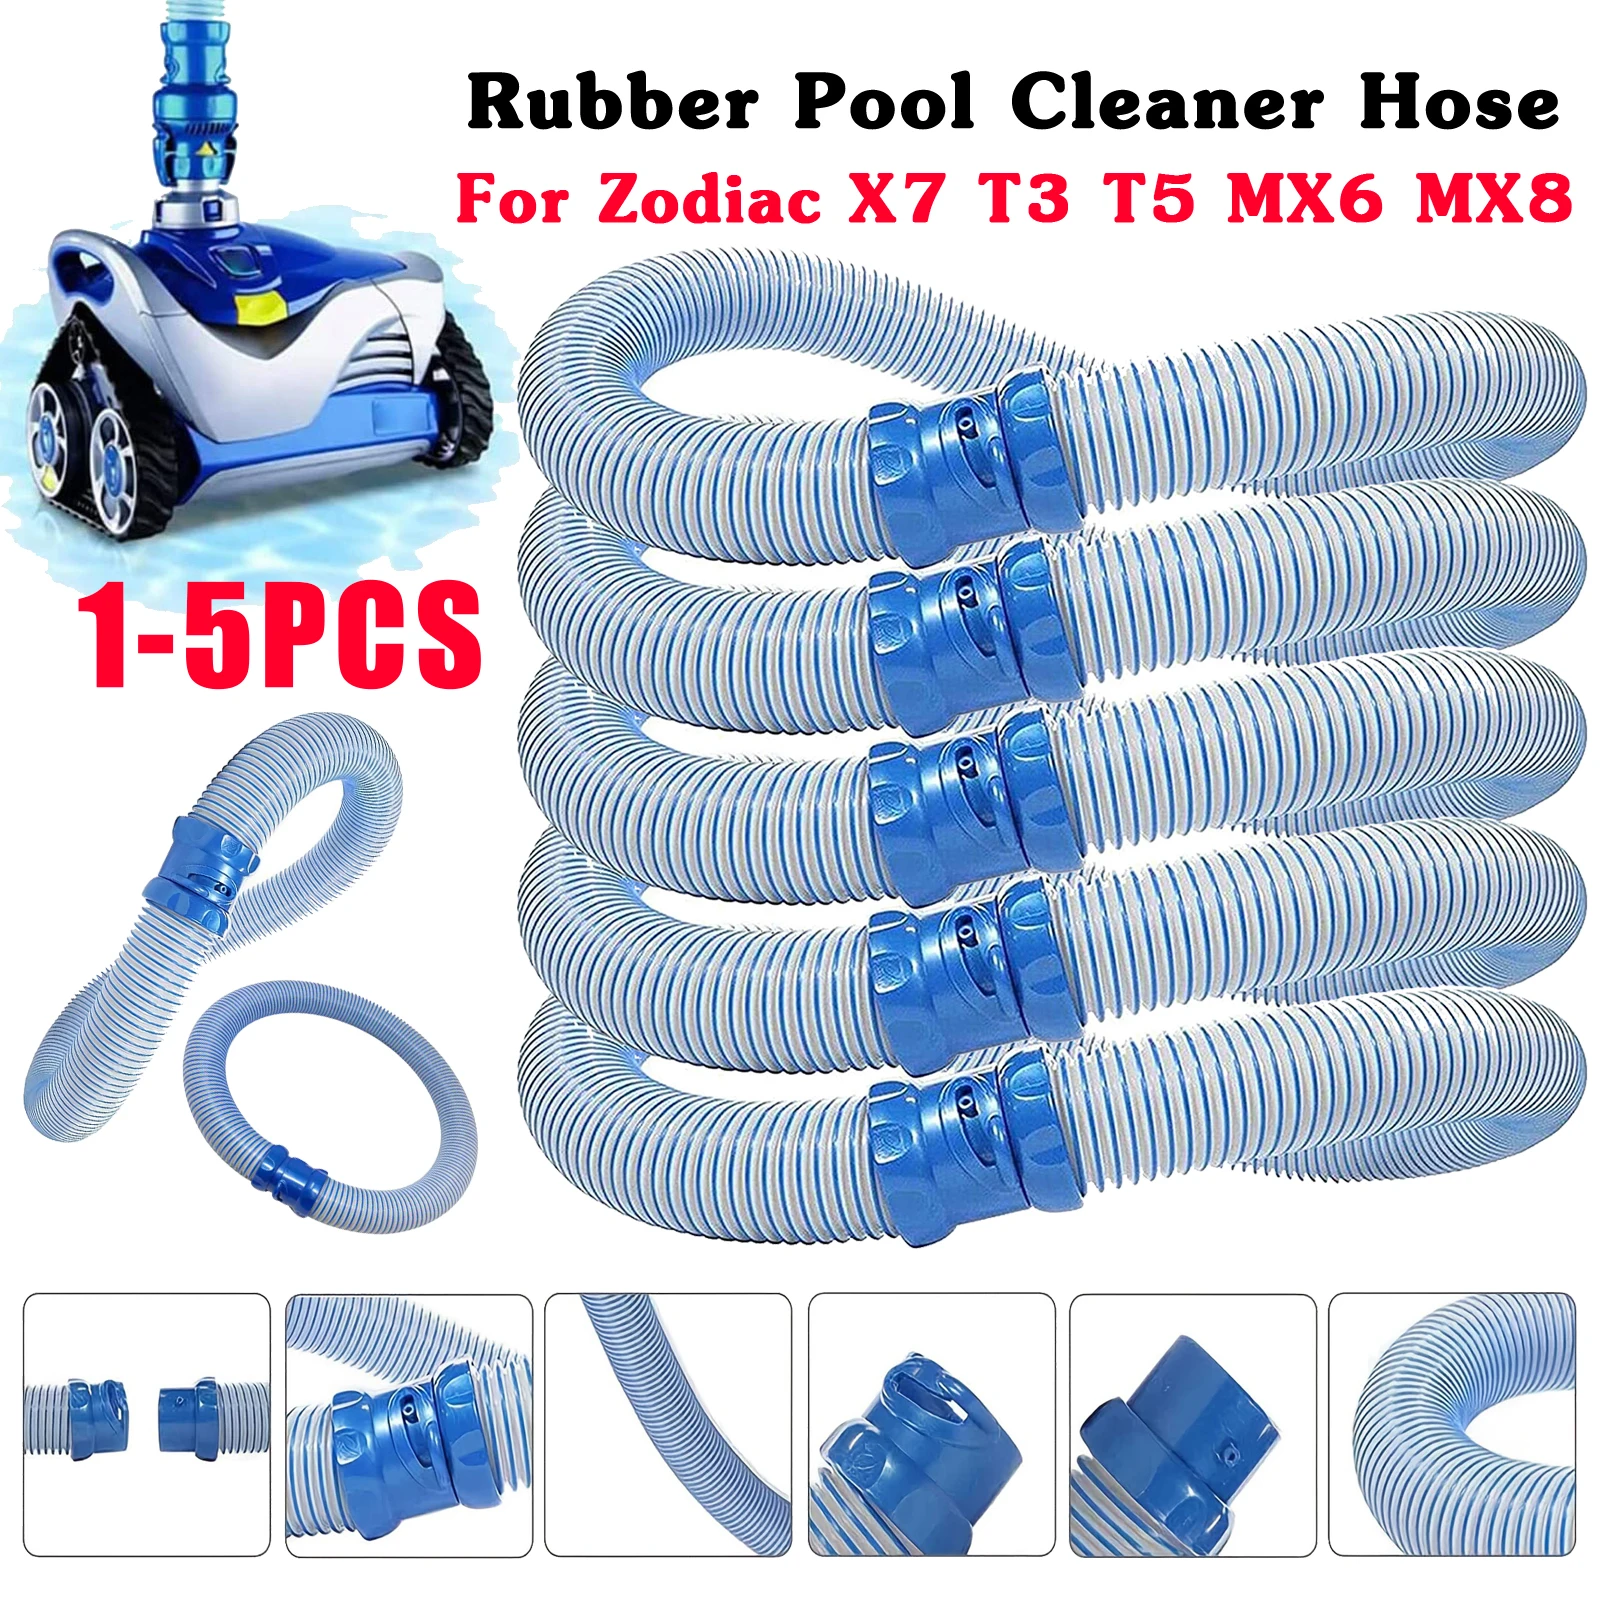 1-5pcs 1m Swimming Pool Cleaner Hose Kit For Zodiac X7 T3 T5 MX6 MX8 Rubber Pool Vacuum Cleaning Pipe Replacement Accessories